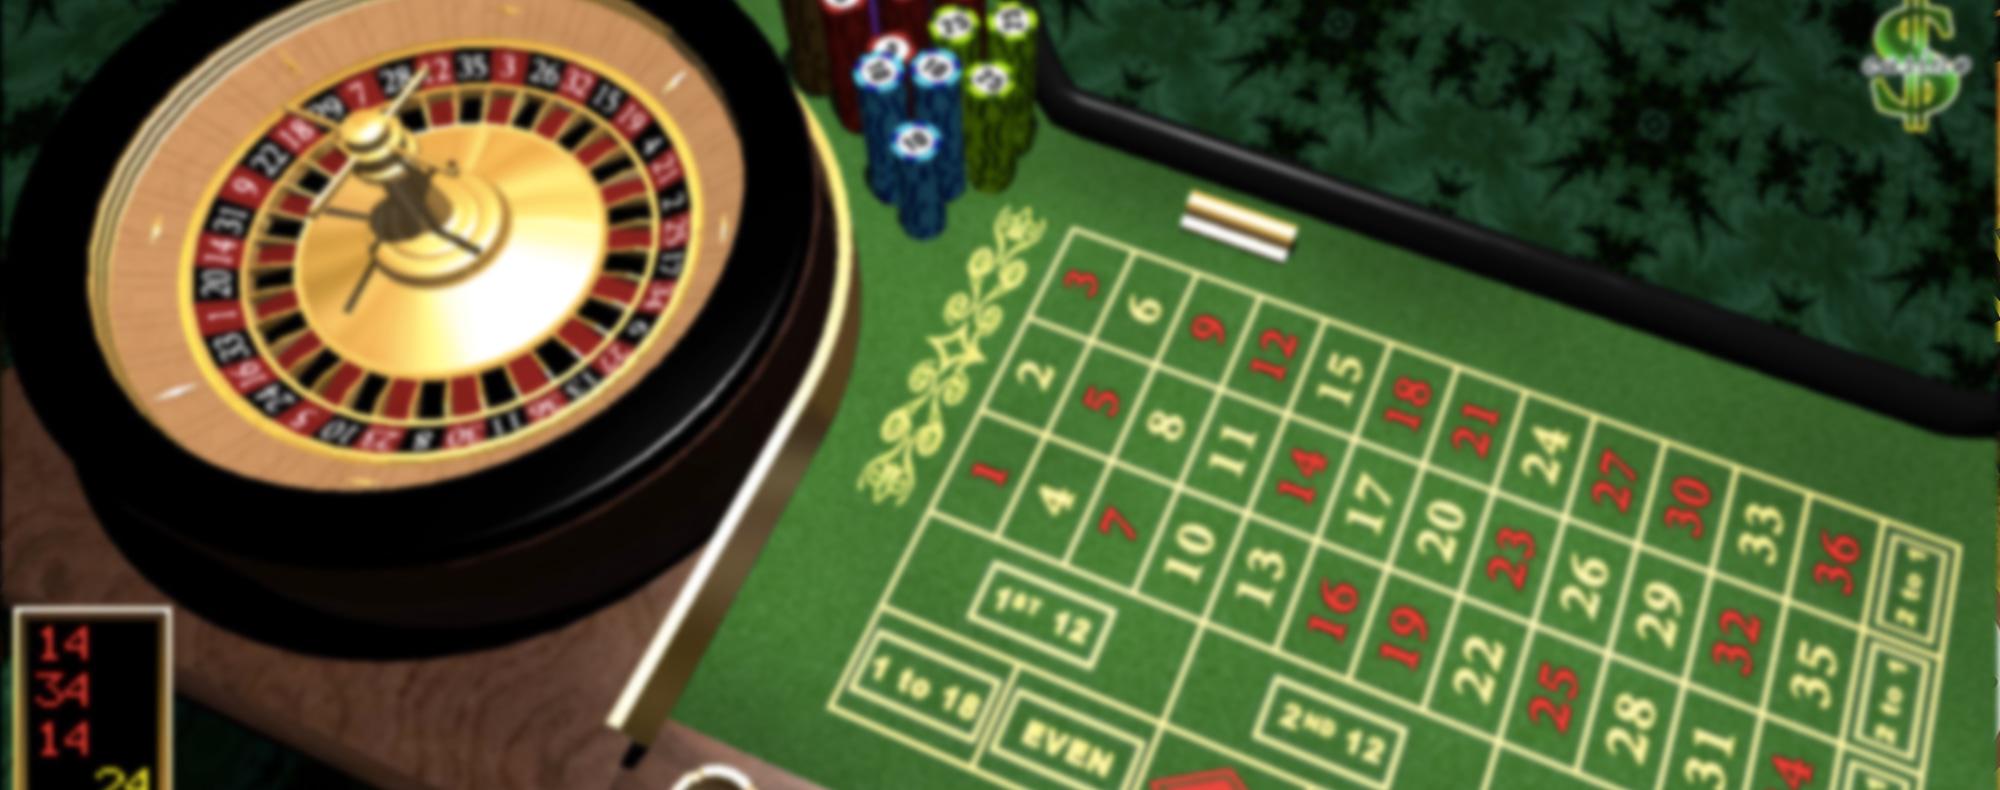 us approved casinos online